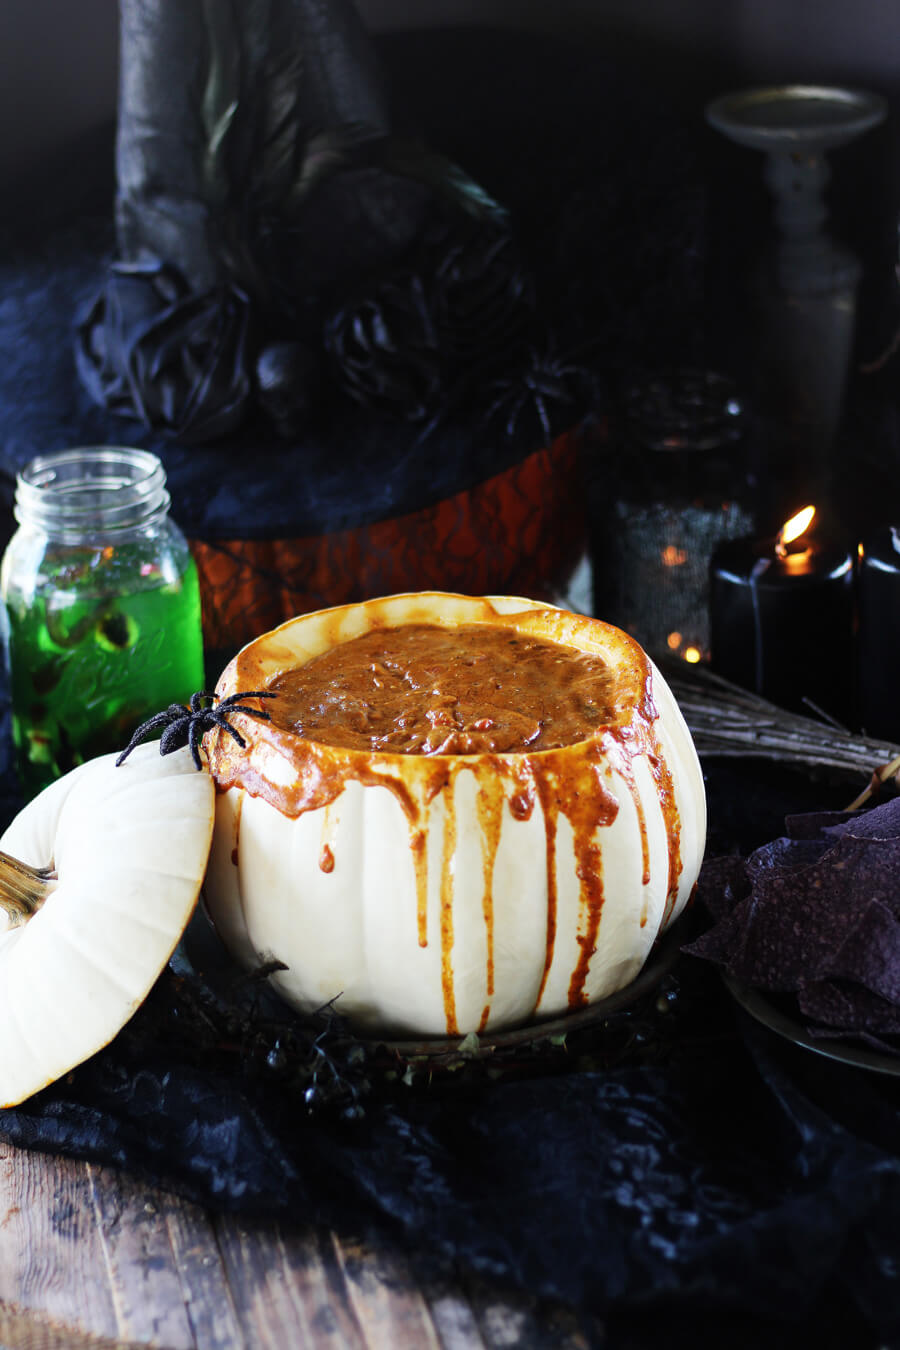 Halloween Chili Cheese RO*TEL Dip | Buy This Cook That - Halloween Chili Cheese RO*TEL Dip is chip after chip-ful of spicy-cheesy goodness that I cannot resist.